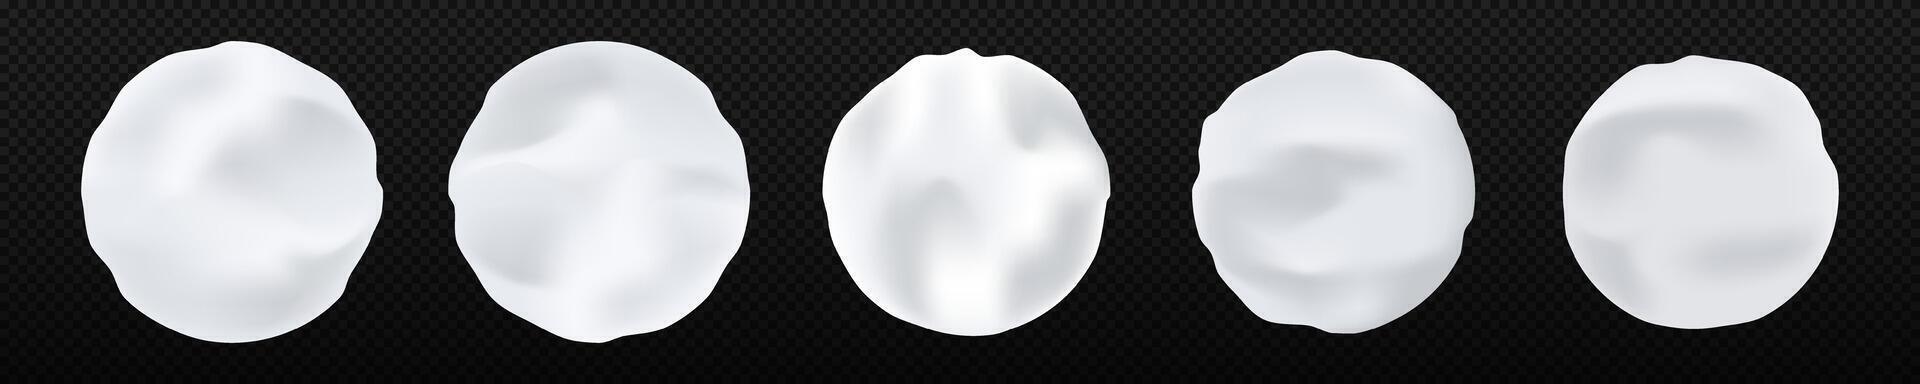 3d realistic snowball white vector